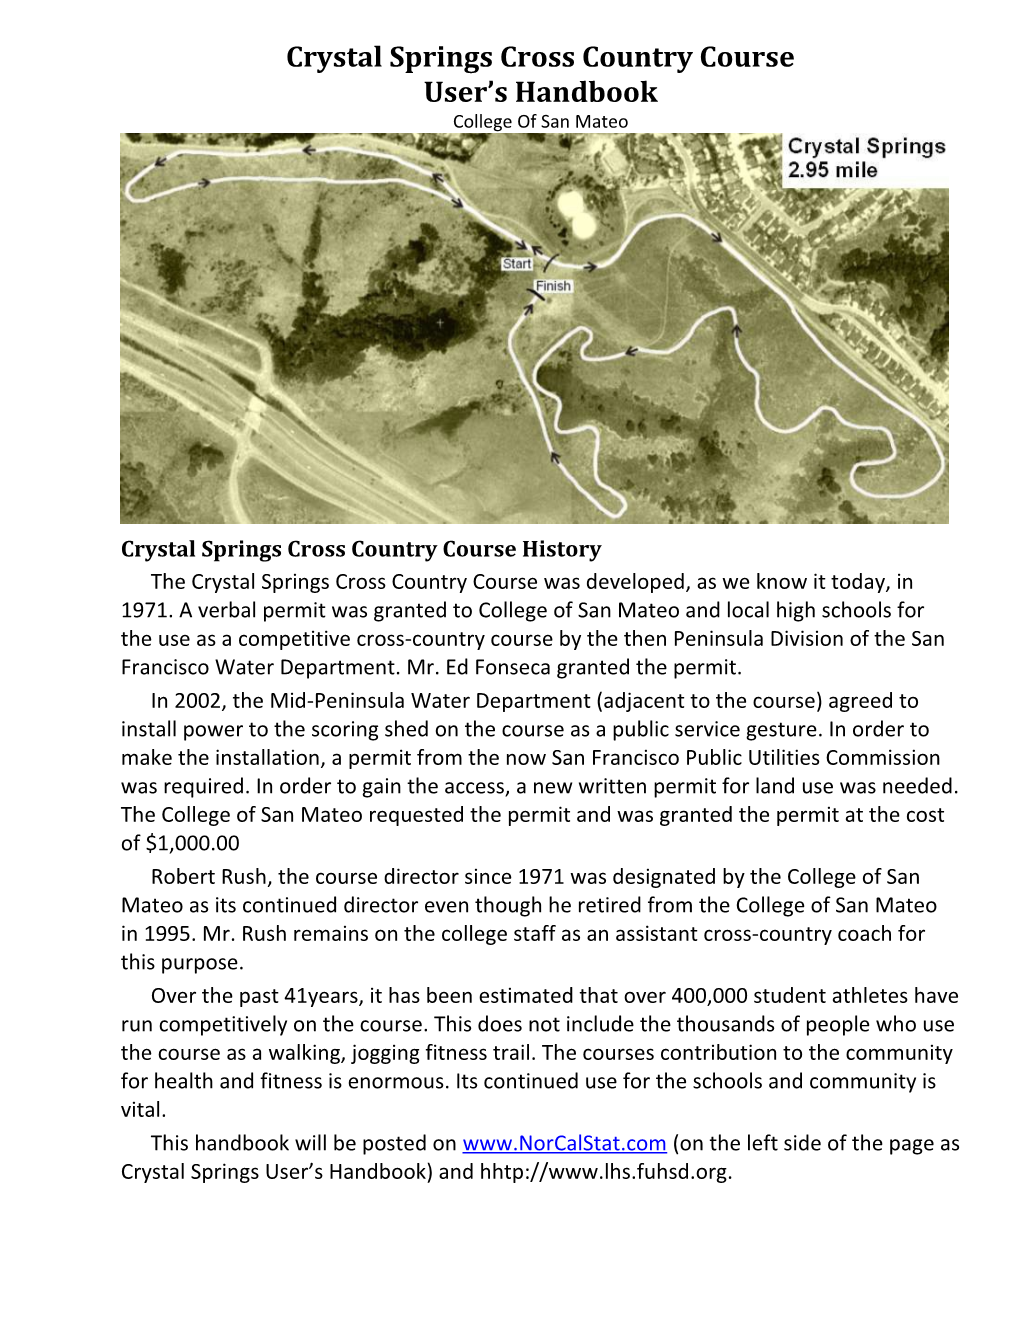 Crystal Springs Cross Country Course History